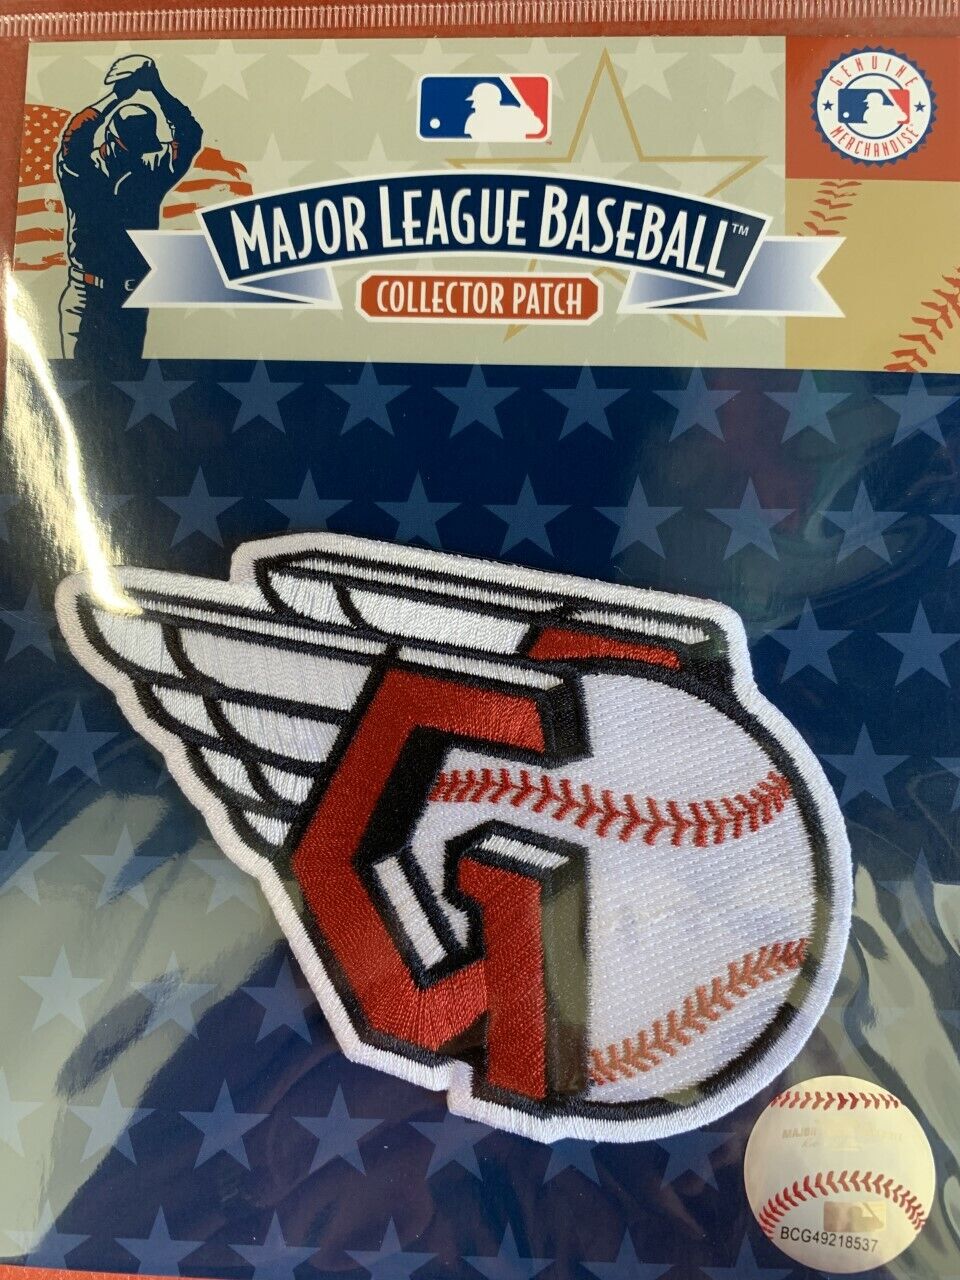 2022 CLEVELAND GUARDIANS PATCH OFFICIALLY LICENSED AKA INDIANS MLB WORLD SERIES 